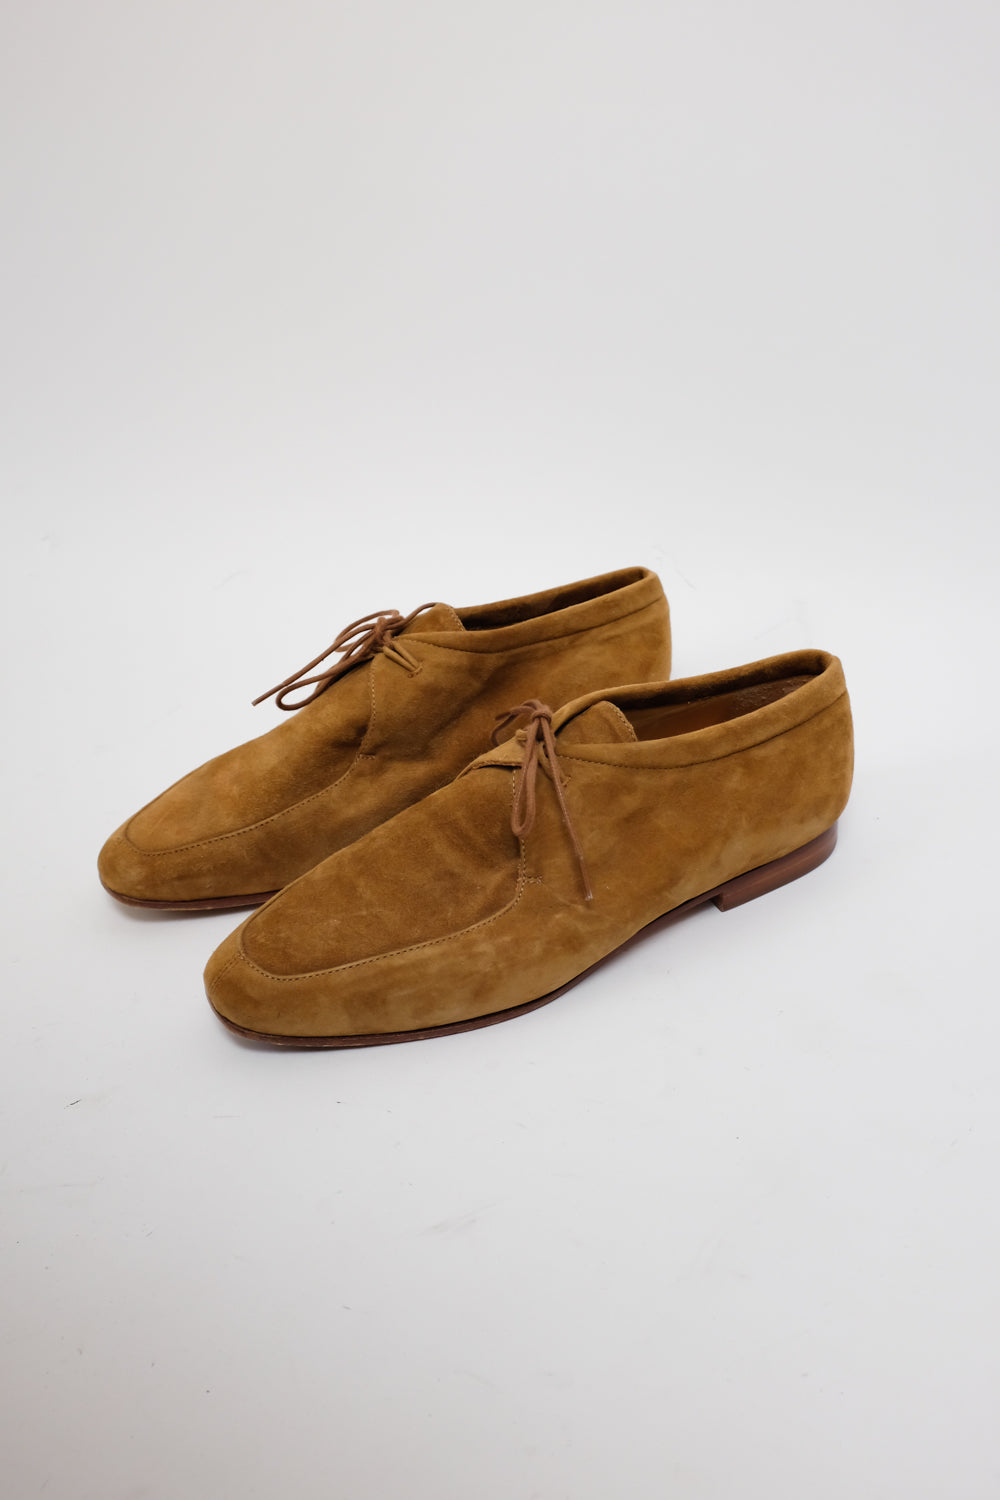 ITALY CAMEL SUEDE LACE UP BROGUES 39